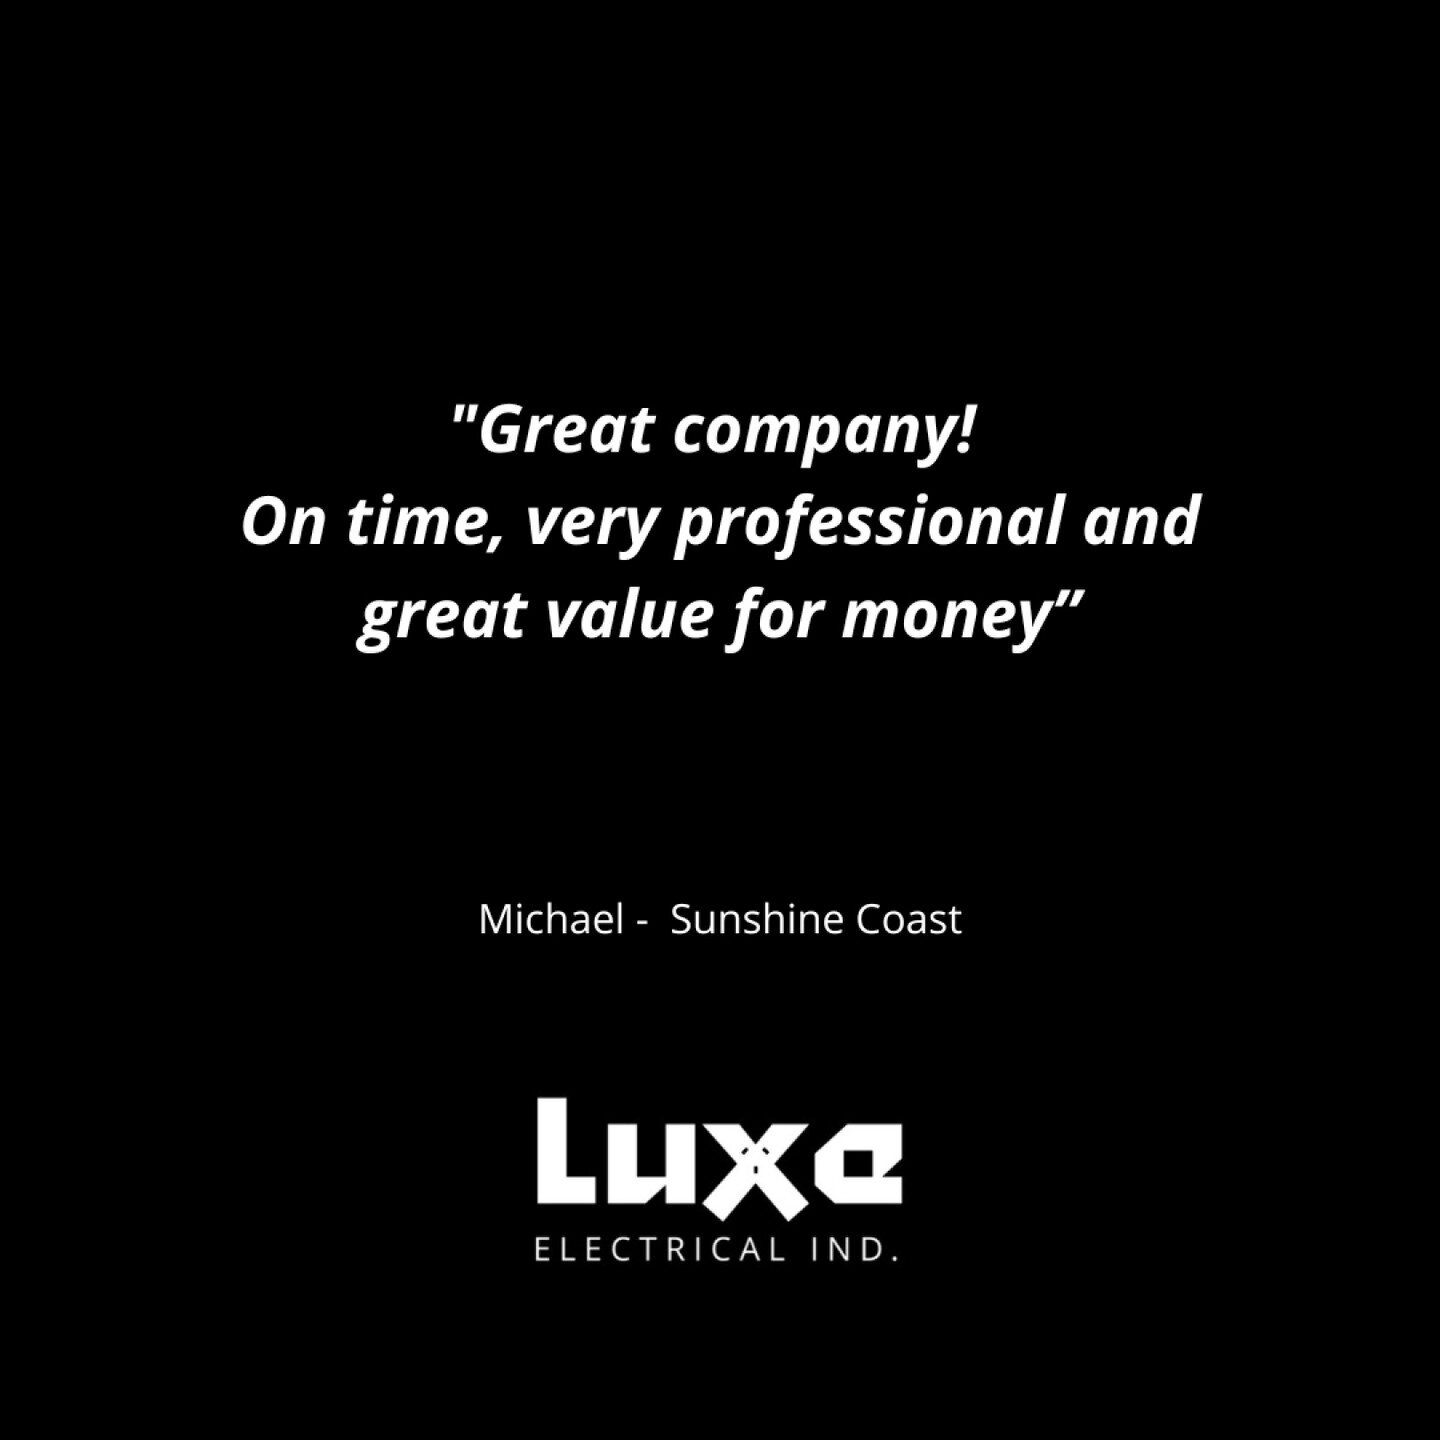 Testimonial from a residential client on the Sunshine Coast
⁣
For a free quote, please call Tim on 0411 212 528 or email tim@luxeelectricalindustries.com.au ⁣
⁣
#electrical #electrician #electriciansunshinecoast #electricianbrisbane #electriciangoldc